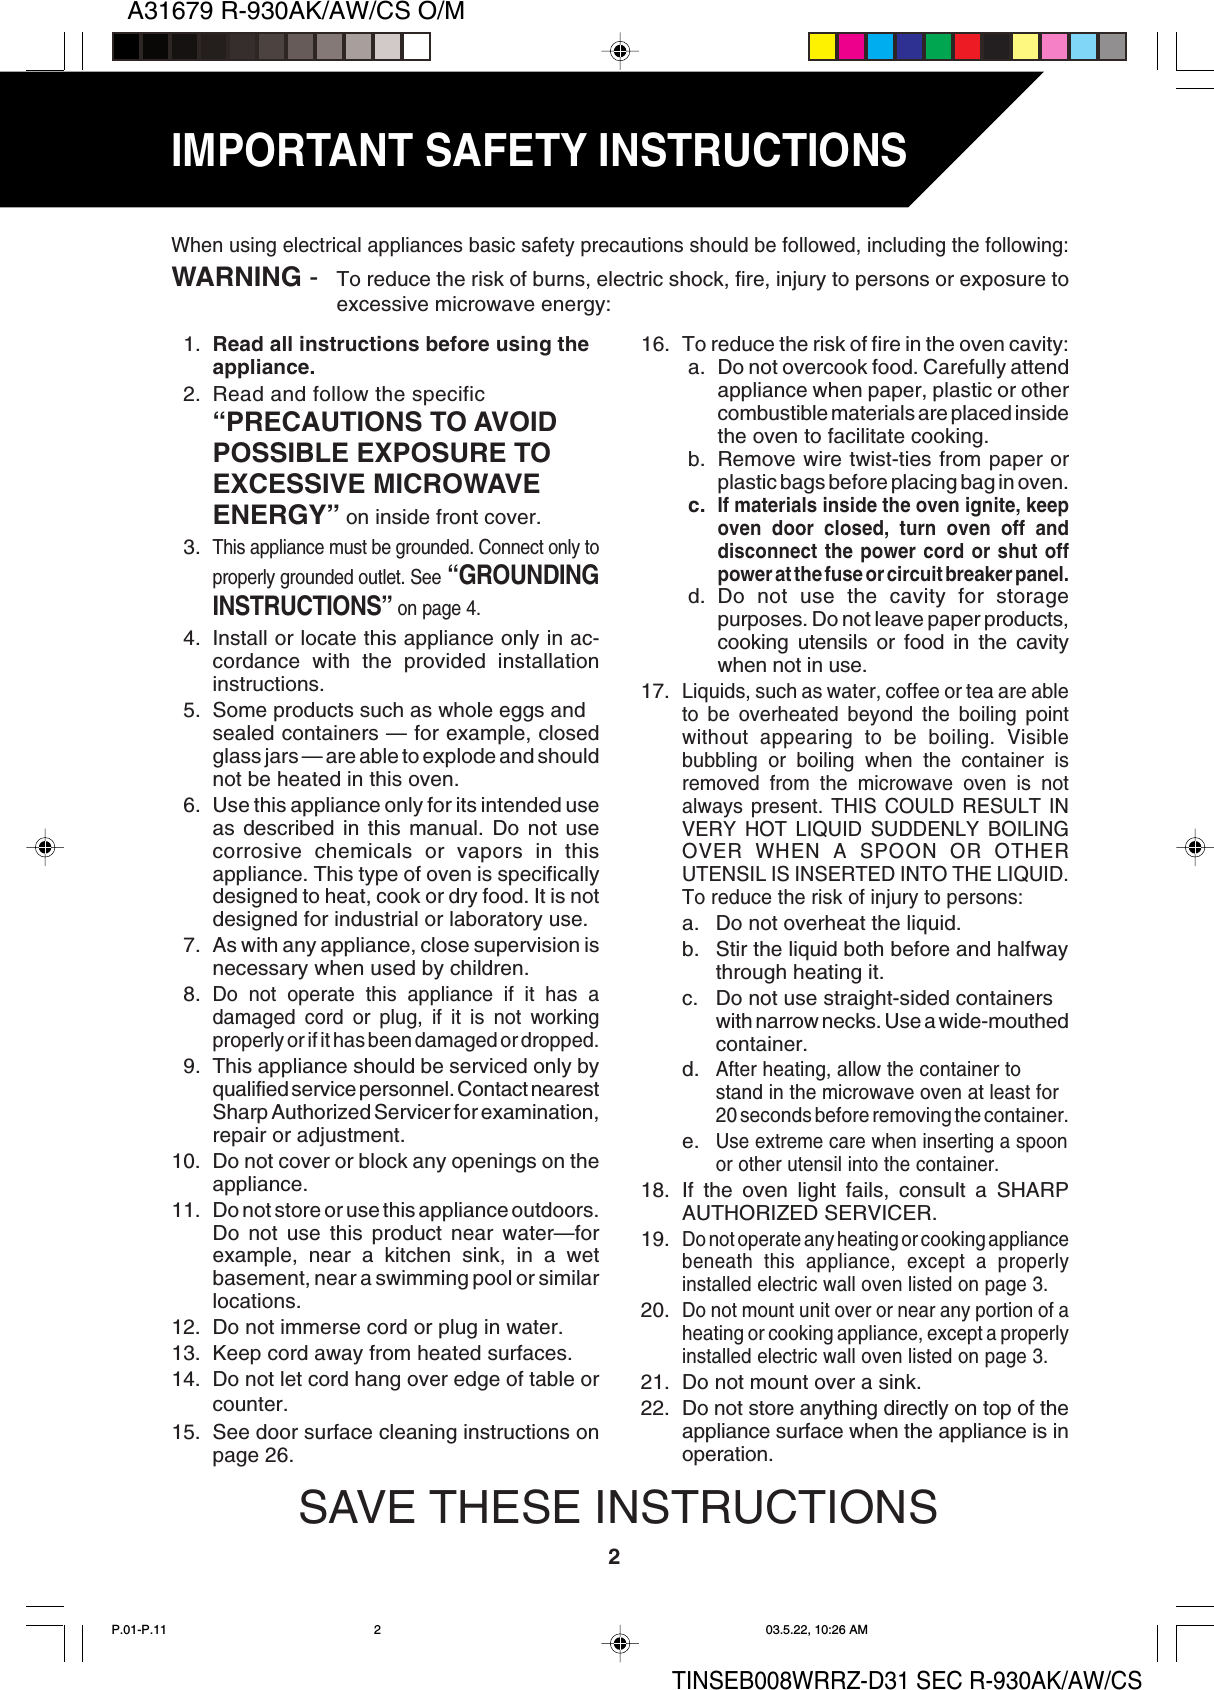 A31679 R-930AK/AW/CS O/M2TINSEB008WRRZ-D31 SEC R-930AK/AW/CSIMPORTANT SAFETY INSTRUCTIONS1. Read all instructions before using theappliance.2. Read and follow the specific“PRECAUTIONS TO AVOIDPOSSIBLE EXPOSURE TOEXCESSIVE MICROWAVEENERGY” on inside front cover.3.This appliance must be grounded. Connect only toproperly grounded outlet. See “GROUNDINGINSTRUCTIONS” on page 4.4. Install or locate this appliance only in ac-cordance with the provided installationinstructions.5. Some products such as whole eggs andsealed containers — for example, closedglass jars — are able to explode and shouldnot be heated in this oven.6. Use this appliance only for its intended useas described in this manual. Do not usecorrosive chemicals or vapors in thisappliance. This type of oven is specificallydesigned to heat, cook or dry food. It is notdesigned for industrial or laboratory use.7. As with any appliance, close supervision isnecessary when used by children.8.Do not operate this appliance if it has adamaged cord or plug, if it is not workingproperly or if it has been damaged or dropped.9. This appliance should be serviced only byqualified service personnel. Contact nearestSharp Authorized Servicer for examination,repair or adjustment.10. Do not cover or block any openings on theappliance.11. Do not store or use this appliance outdoors.Do not use this product near water—forexample, near a kitchen sink, in a wetbasement, near a swimming pool or similarlocations.12. Do not immerse cord or plug in water.13. Keep cord away from heated surfaces.14. Do not let cord hang over edge of table orcounter.15. See door surface cleaning instructions onpage 26.When using electrical appliances basic safety precautions should be followed, including the following:WARNING - To reduce the risk of burns, electric shock, fire, injury to persons or exposure toexcessive microwave energy:16. To reduce the risk of fire in the oven cavity:a. Do not overcook food. Carefully attendappliance when paper, plastic or othercombustible materials are placed insidethe oven to facilitate cooking.b. Remove wire twist-ties from paper orplastic bags before placing bag in oven.c.If materials inside the oven ignite, keepoven door closed, turn oven off anddisconnect the power cord or shut offpower at the fuse or circuit breaker panel.d. Do not use the cavity for storagepurposes. Do not leave paper products,cooking utensils or food in the cavitywhen not in use.17.Liquids, such as water, coffee or tea are ableto be overheated beyond the boiling pointwithout appearing to be boiling. Visiblebubbling or boiling when the container isremoved from the microwave oven is notalways present. THIS COULD RESULT INVERY HOT LIQUID SUDDENLY BOILINGOVER WHEN A SPOON OR OTHERUTENSIL IS INSERTED INTO THE LIQUID.To reduce the risk of injury to persons:a. Do not overheat the liquid.b. Stir the liquid both before and halfwaythrough heating it.c. Do not use straight-sided containerswith narrow necks. Use a wide-mouthedcontainer.d.After heating, allow the container tostand in the microwave oven at least for20 seconds before removing the container.e.Use extreme care when inserting a spoonor other utensil into the container.18. If the oven light fails, consult a SHARPAUTHORIZED SERVICER.19.Do not operate any heating or cooking appliancebeneath this appliance, except a properlyinstalled electric wall oven listed on page 3.20.Do not mount unit over or near any portion of aheating or cooking appliance, except a properlyinstalled electric wall oven listed on page 3.21. Do not mount over a sink.22. Do not store anything directly on top of theappliance surface when the appliance is inoperation.SAVE THESE INSTRUCTIONSP.01-P.11 03.5.22, 10:26 AM2